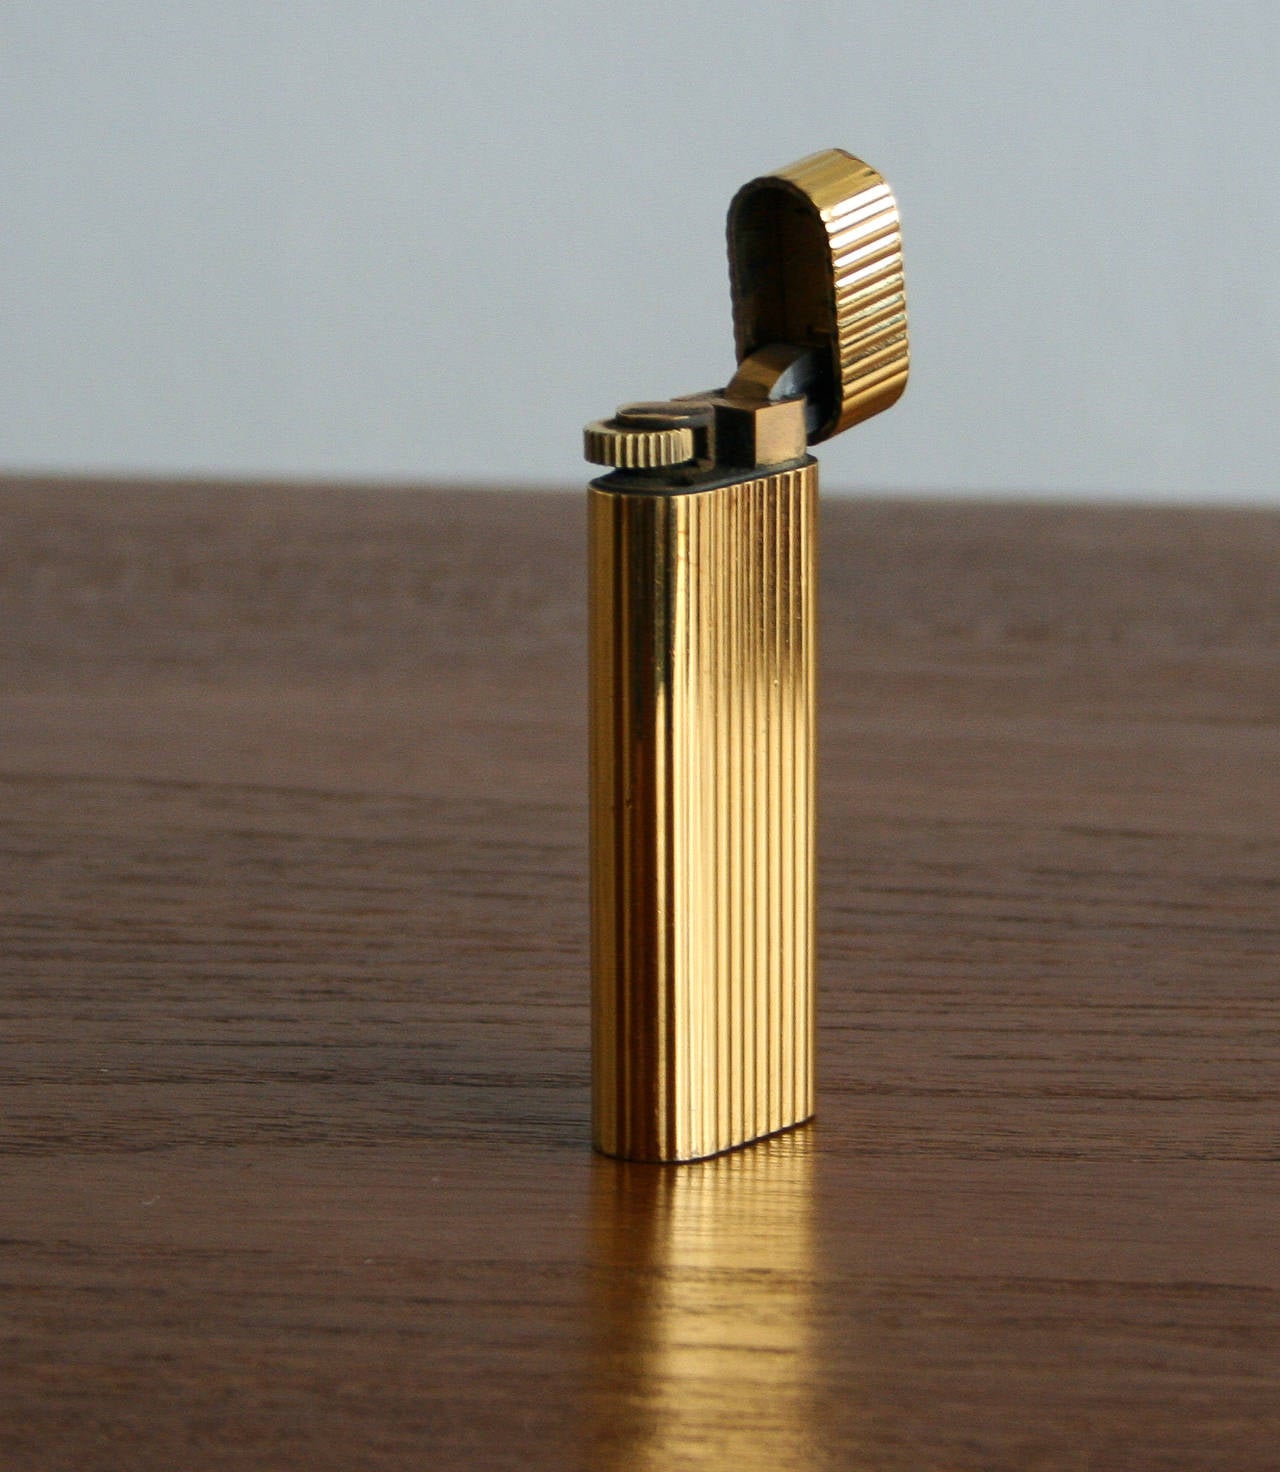 Authentic Cartier lighter.
Marked and numbered.
In the original box, and complete with warranty card and users manual.
We also have a matching ballpoint pen.
Free worldwide shipping with FedEx.